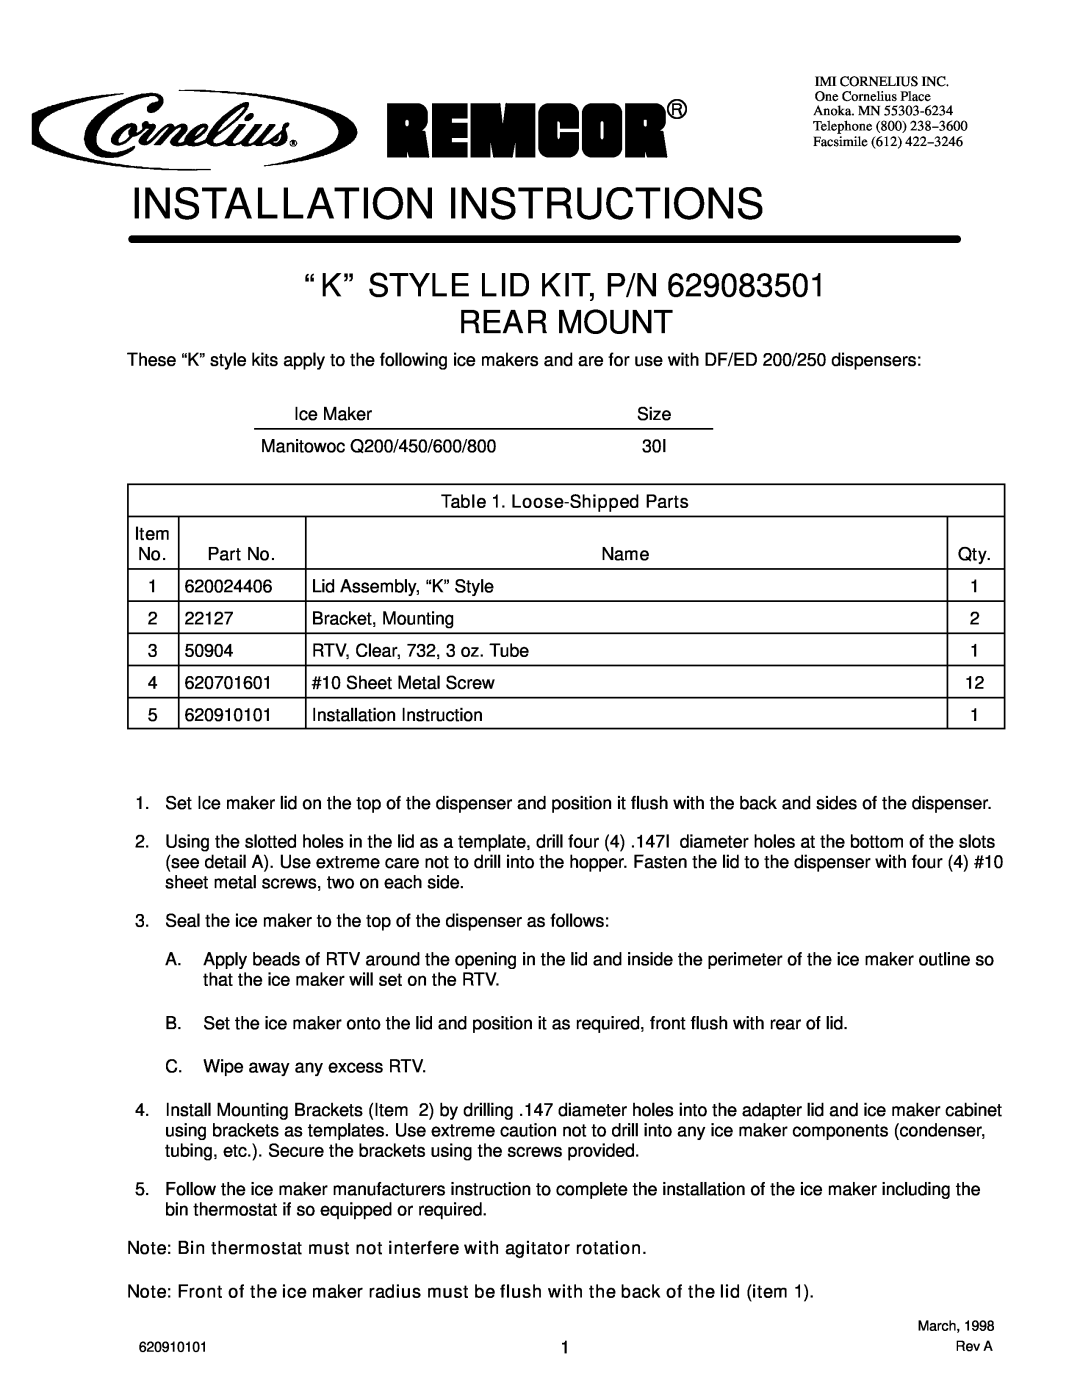 Cornelius P/N 620910101 installation instructions Installation Instructions, “K” Style Lid Kit, P/N Rear Mount, Name 